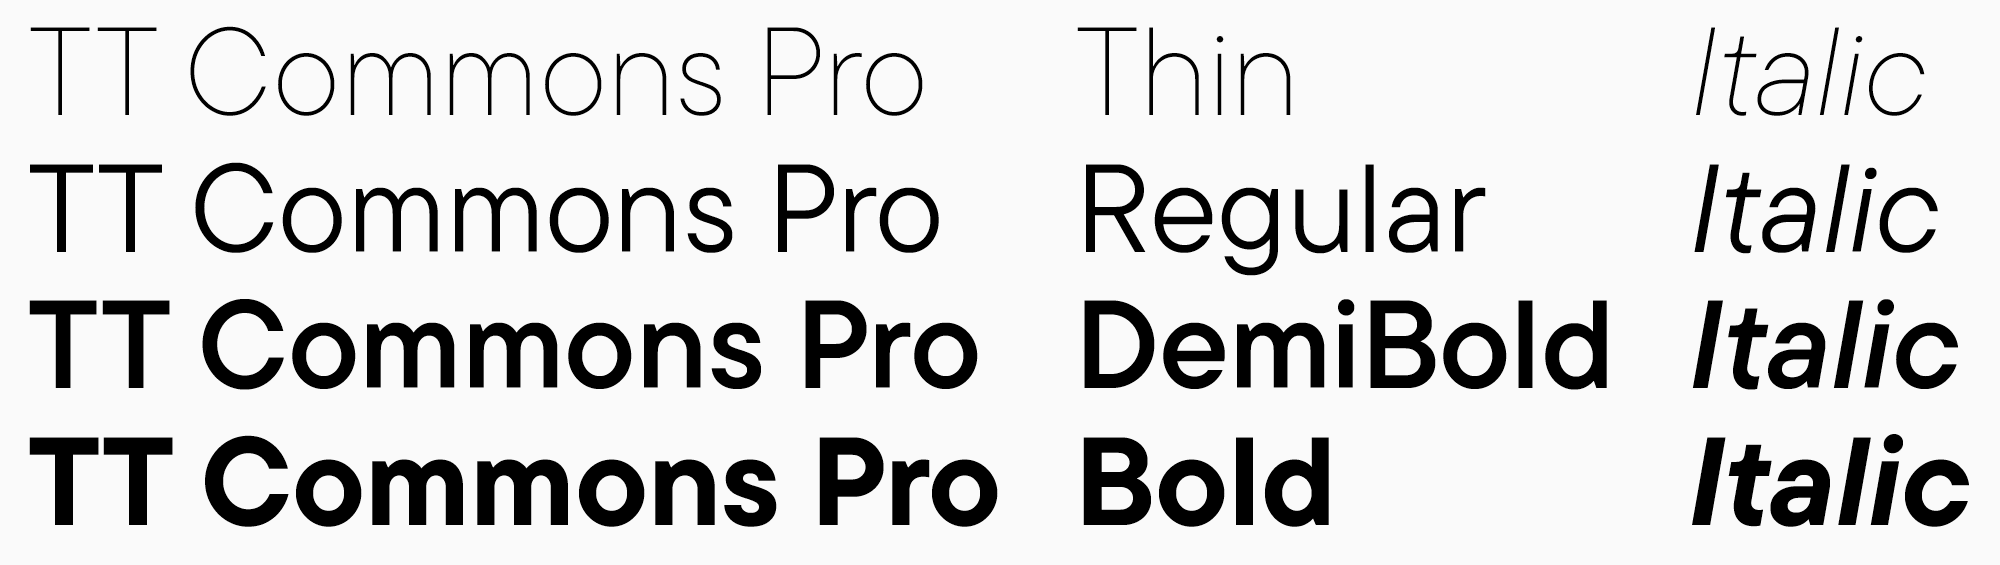 What is a typeface/type family?